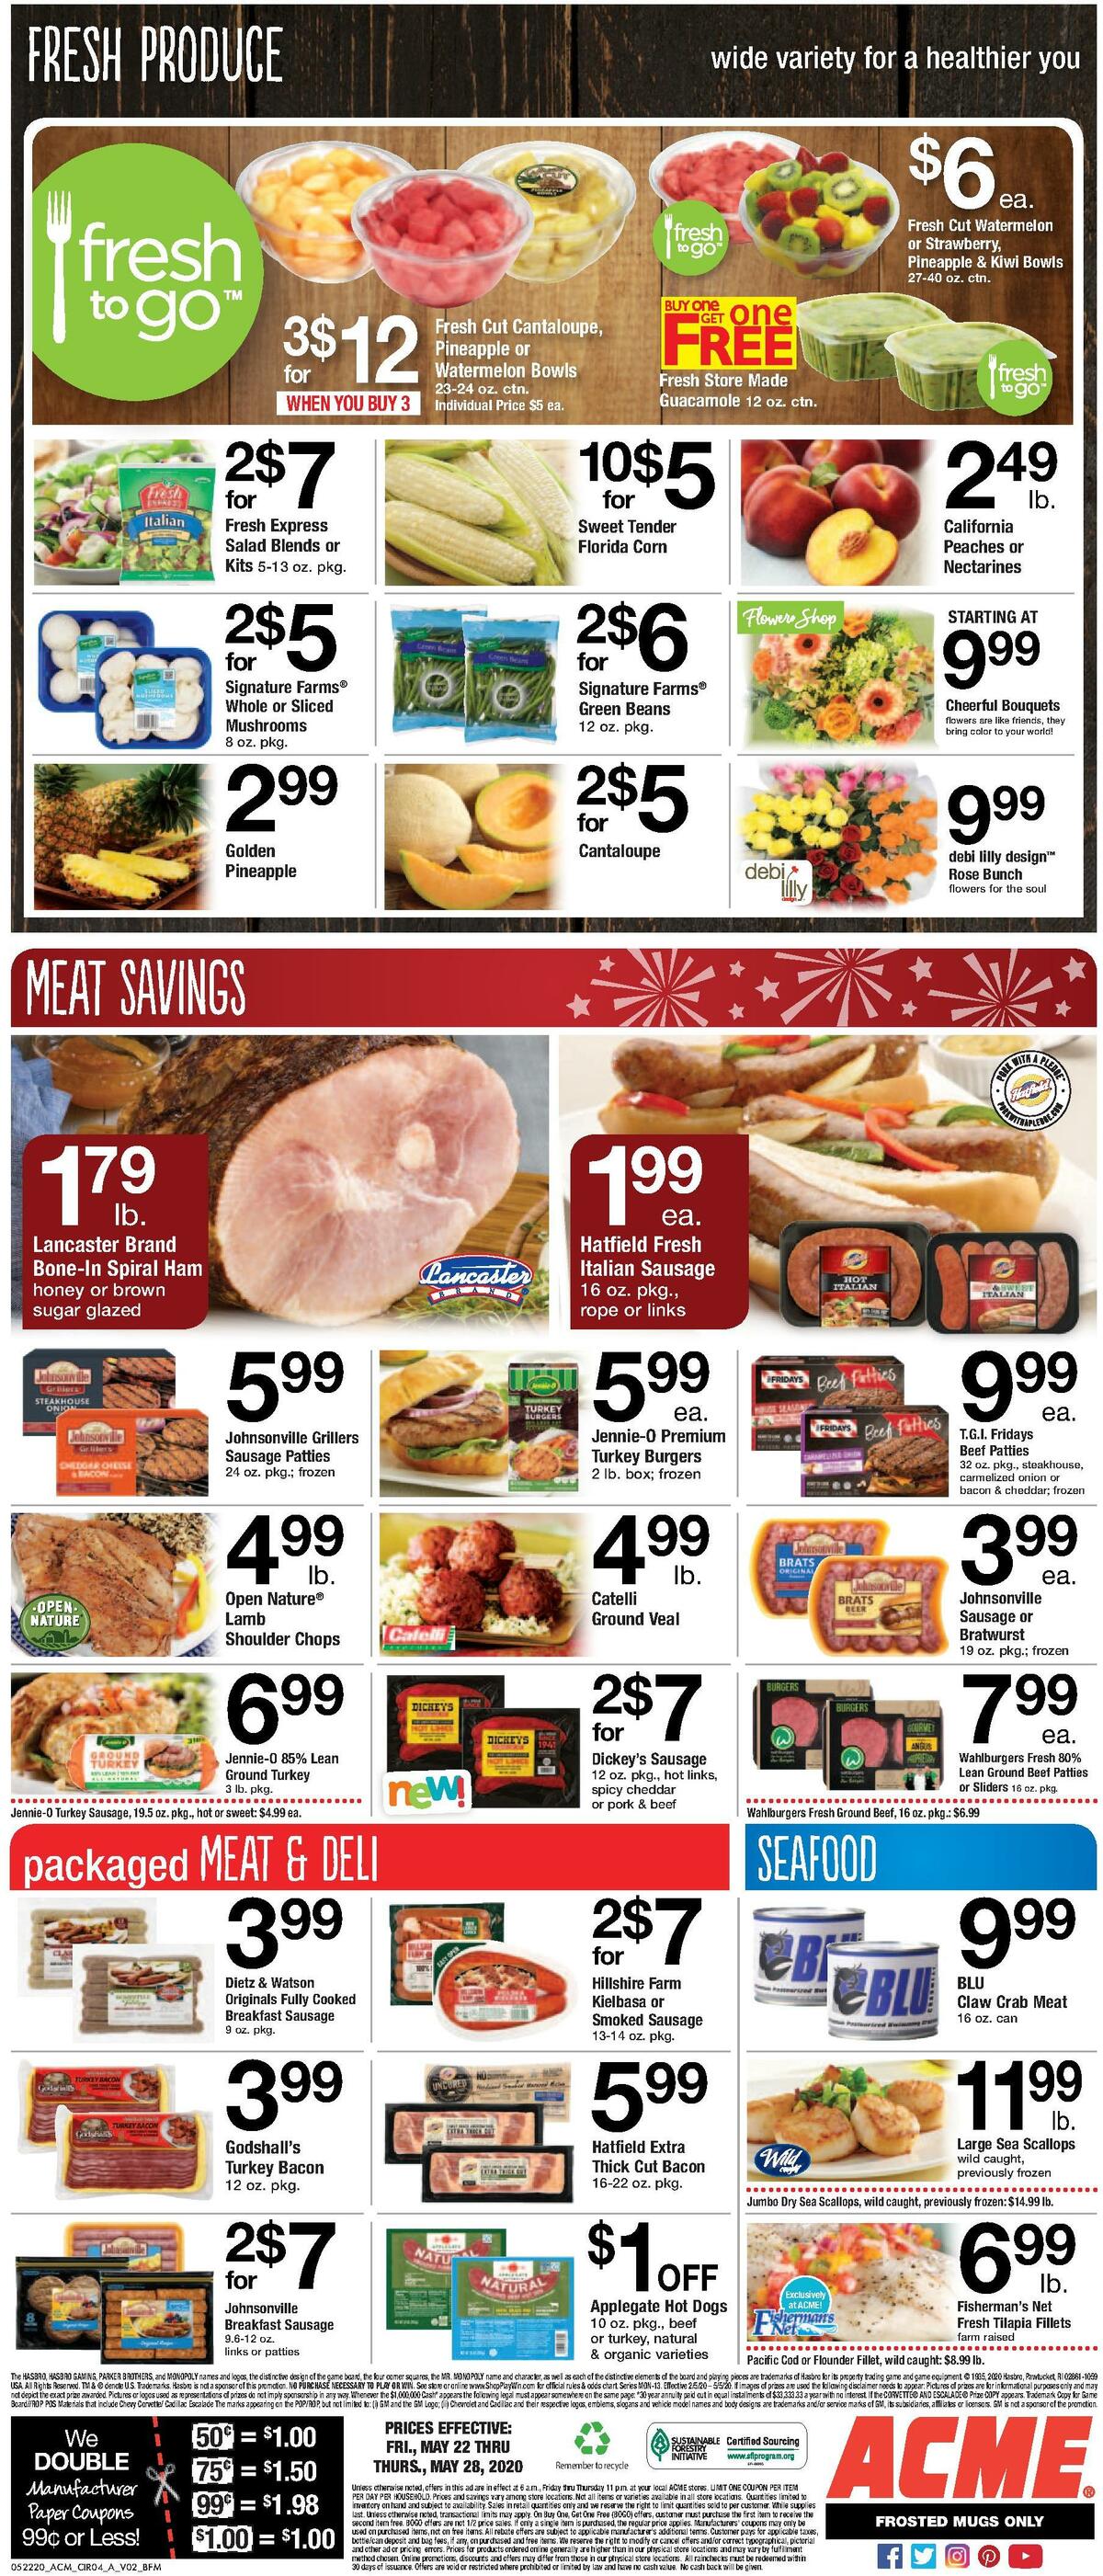 ACME Markets Weekly Ad from May 22